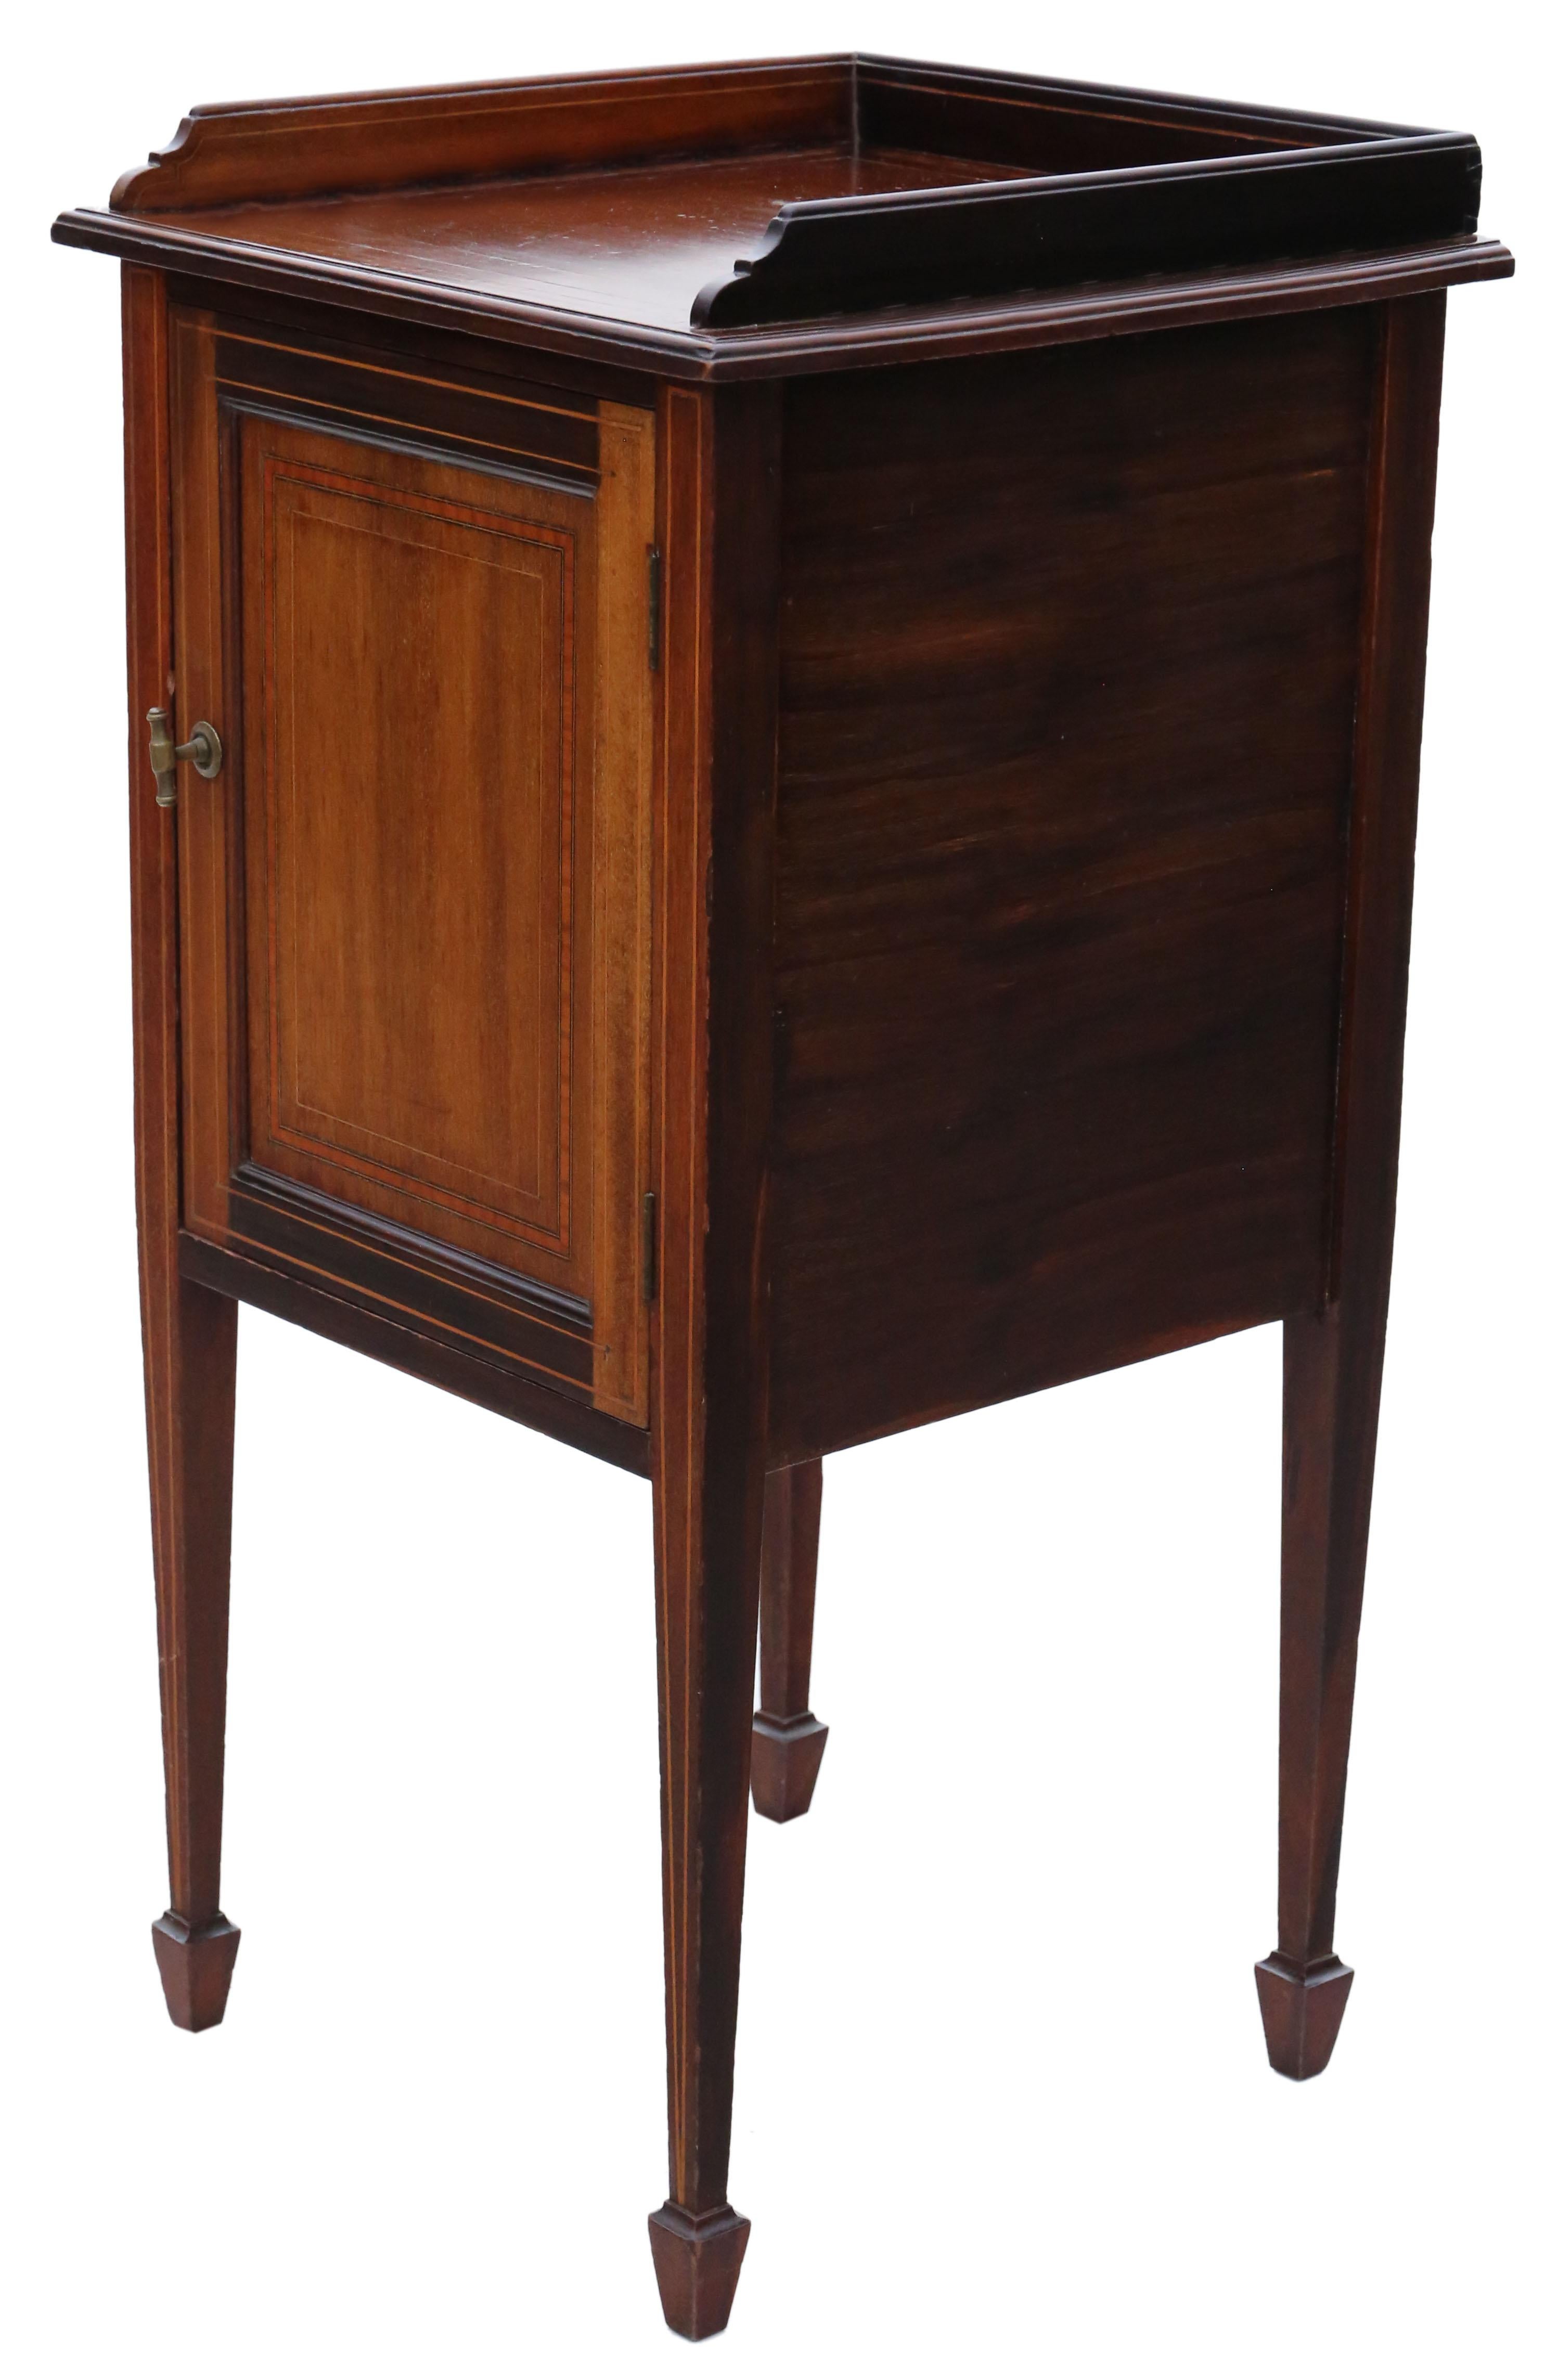 Early 20th Century Antique Fine Quality Tray Top Inlaid Mahogany Bedside Table Cupboard For Sale